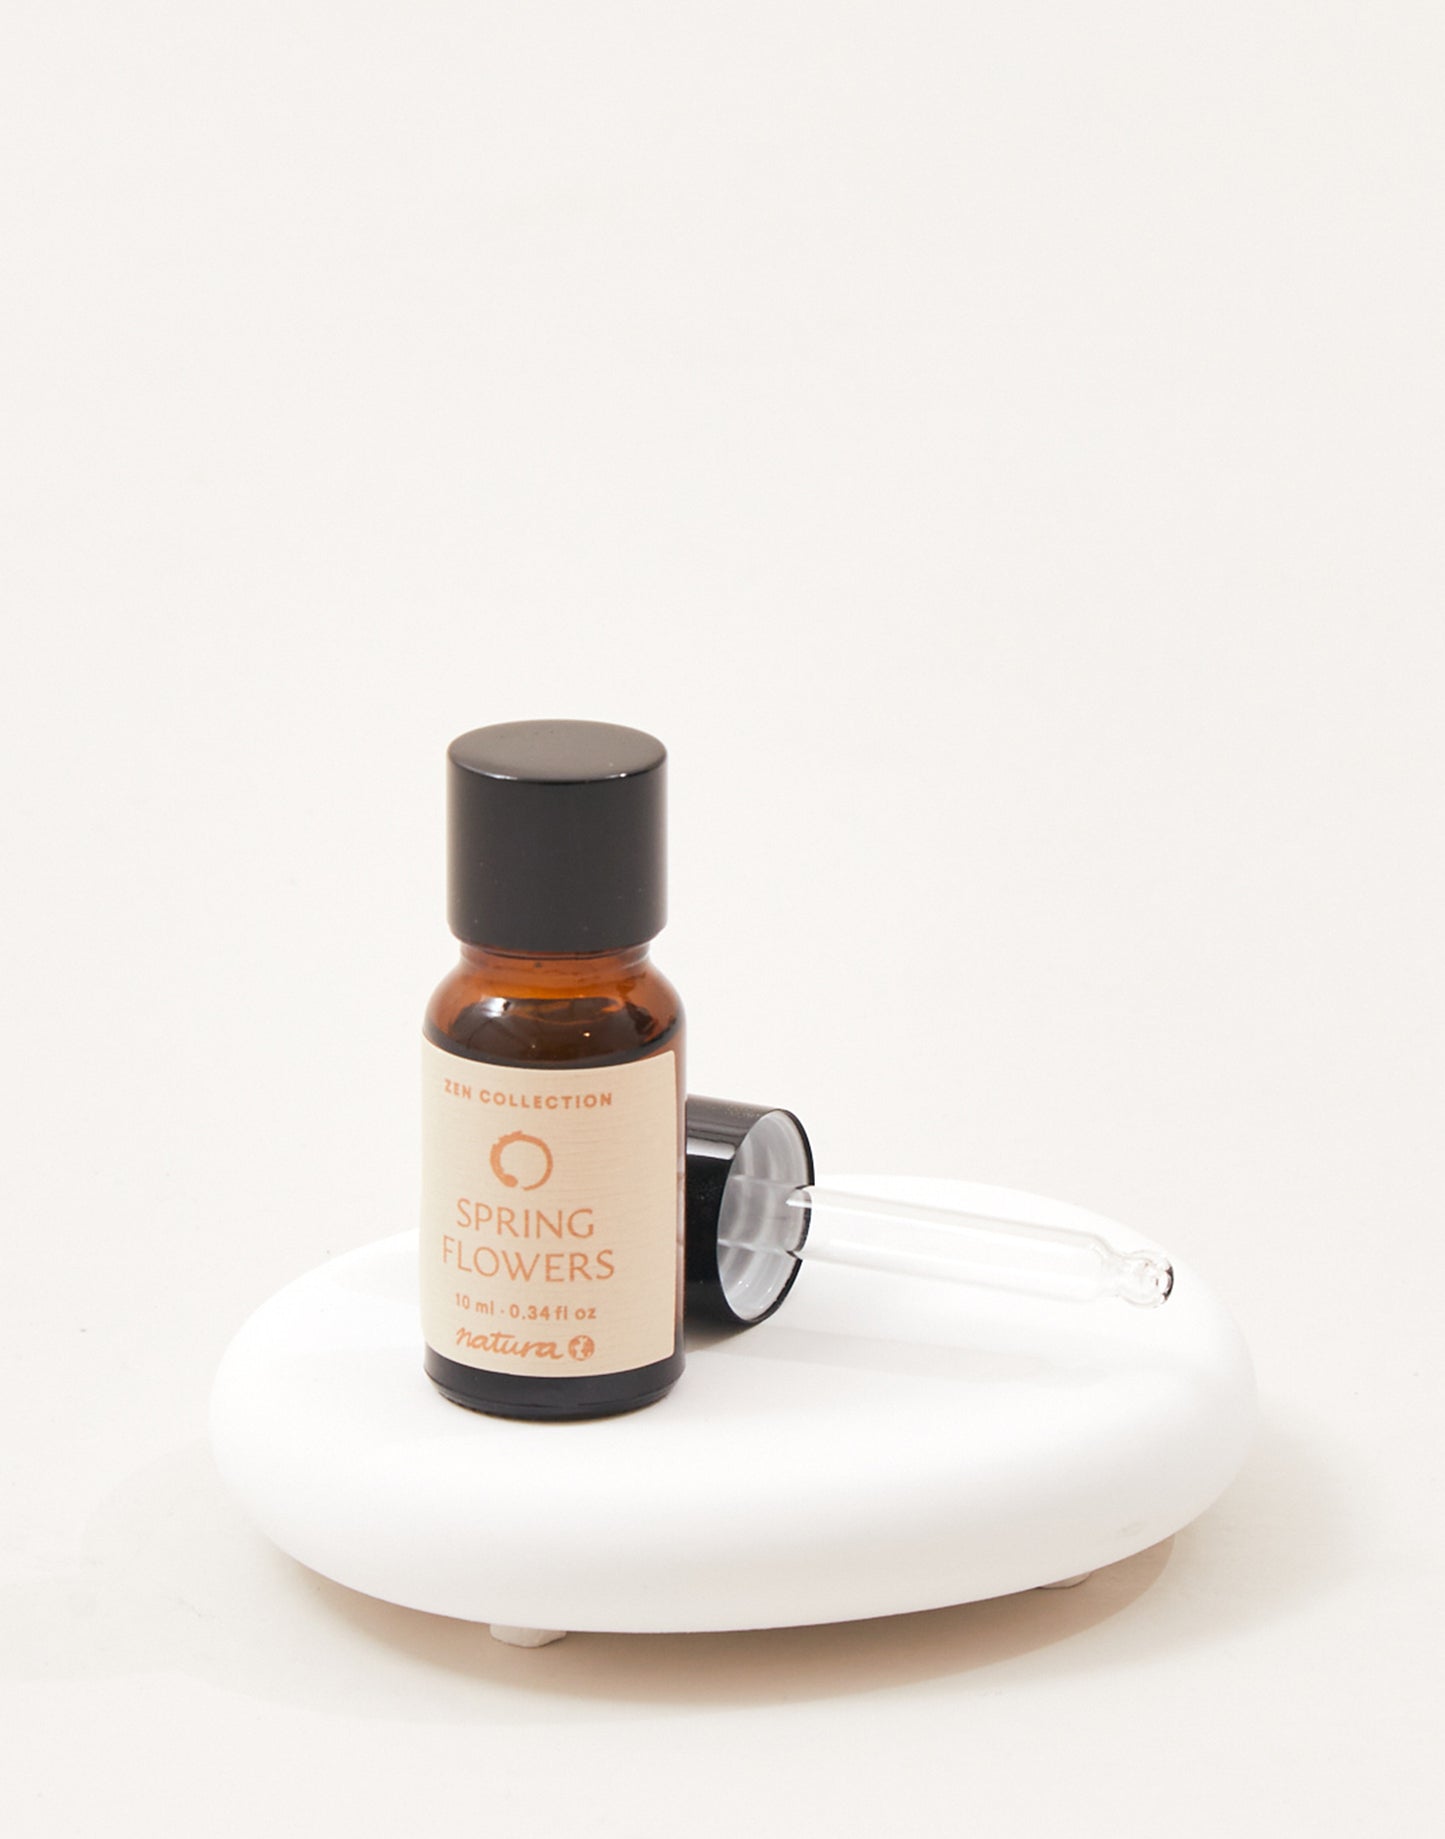 Essential oil and ceramic stone set Zen Collection